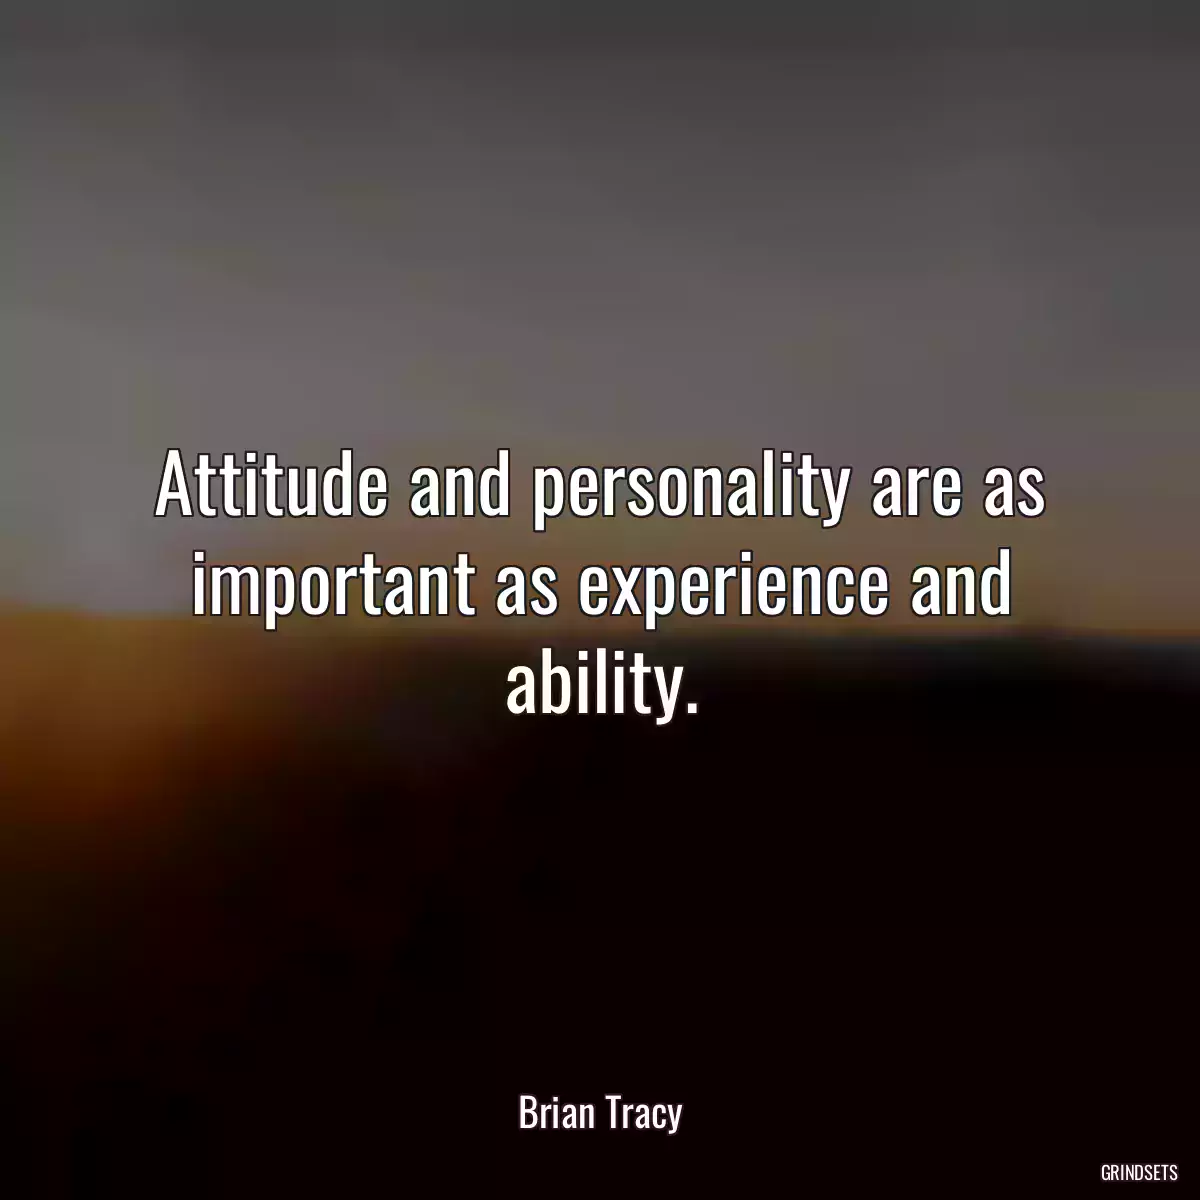 Attitude and personality are as important as experience and ability.